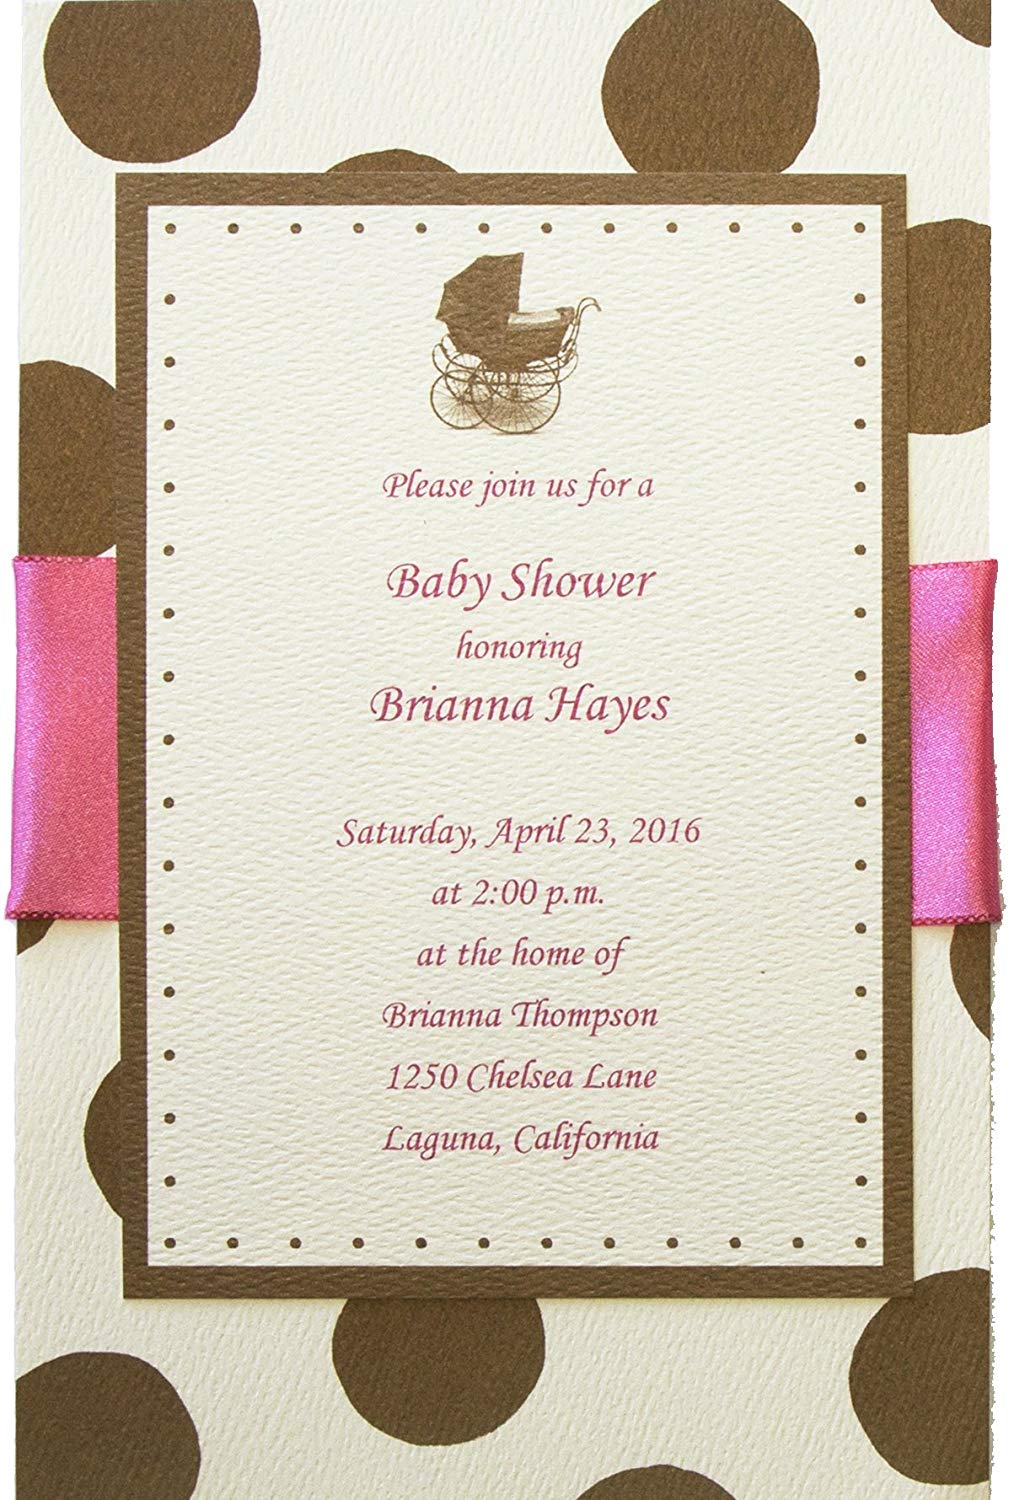 Full Size of Baby Shower:nautical Baby Shower Invitations For Boys Baby Girl Themes For Bedroom Baby Shower Ideas Baby Shower Decorations Themes For Baby Girl Nursery Nursery For Girls Baby Shower Ideas For Girls Baby Girl Themes For Baby Shower Pinterest Nursery Ideas